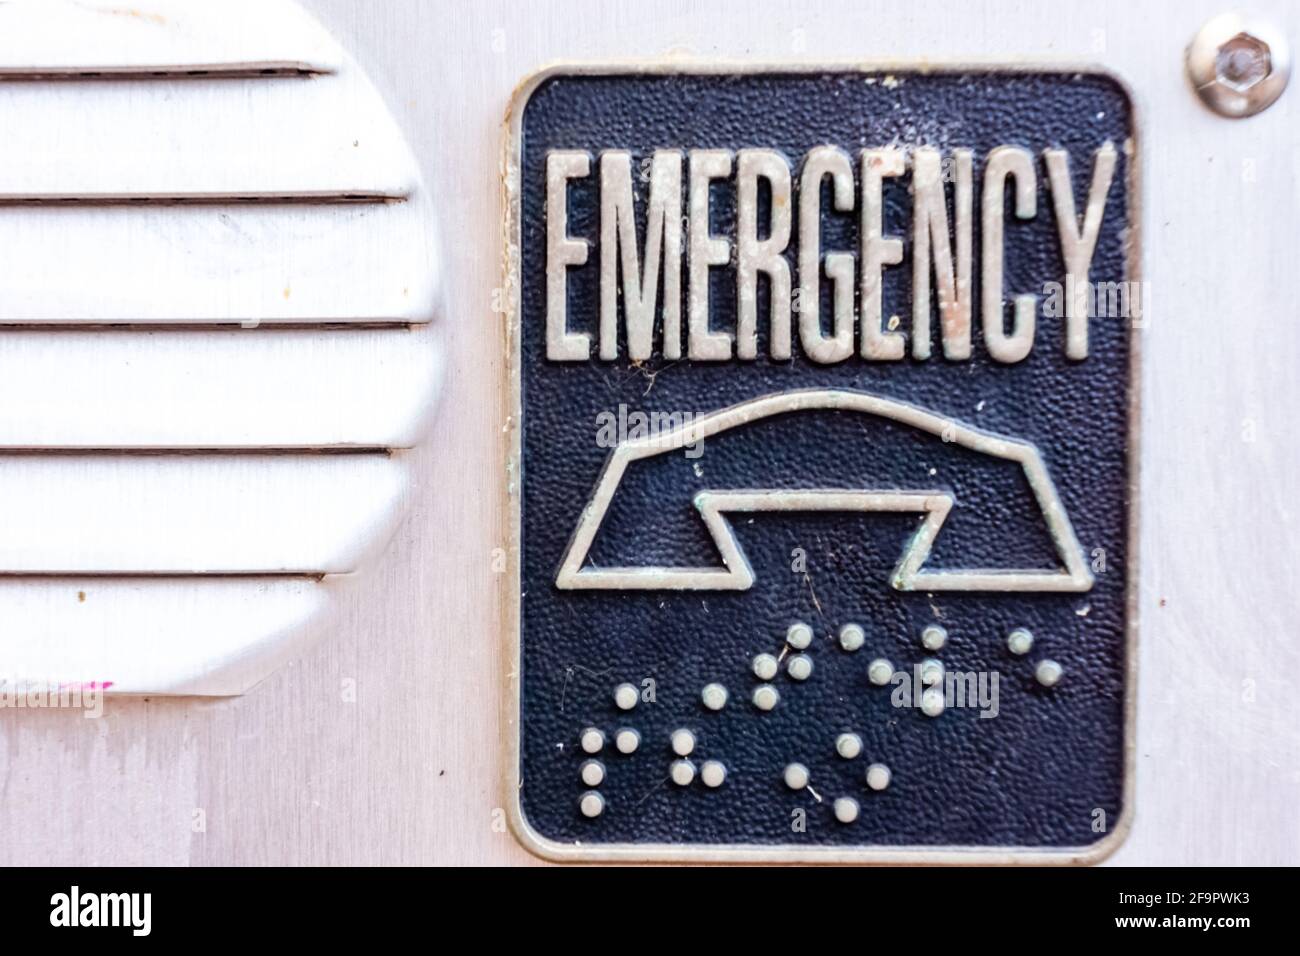 Close up of an emergency call box placard showing the word emergency a graphic of a phone and braille lettering. Stock Photo